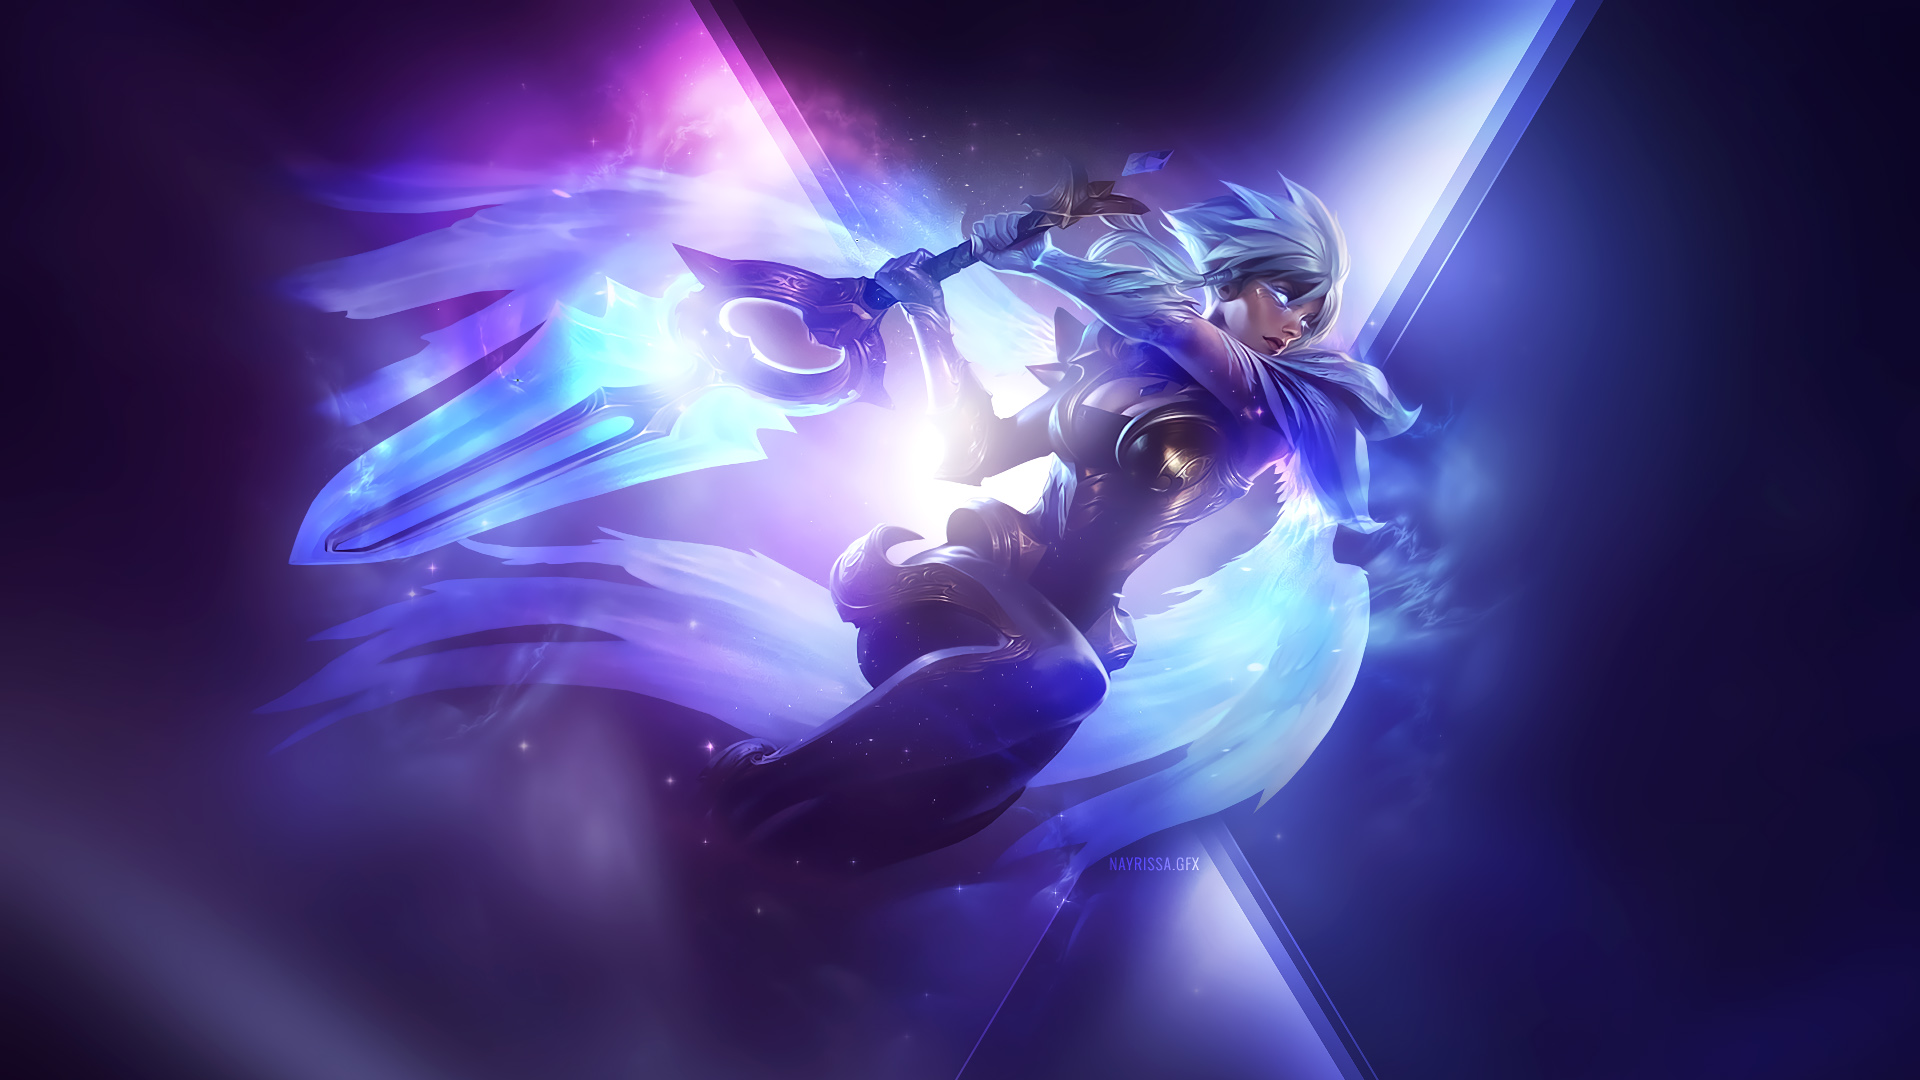 Click The Wallpaper To View Full Size - Lol Riven Wallpaper Hd , HD Wallpaper & Backgrounds